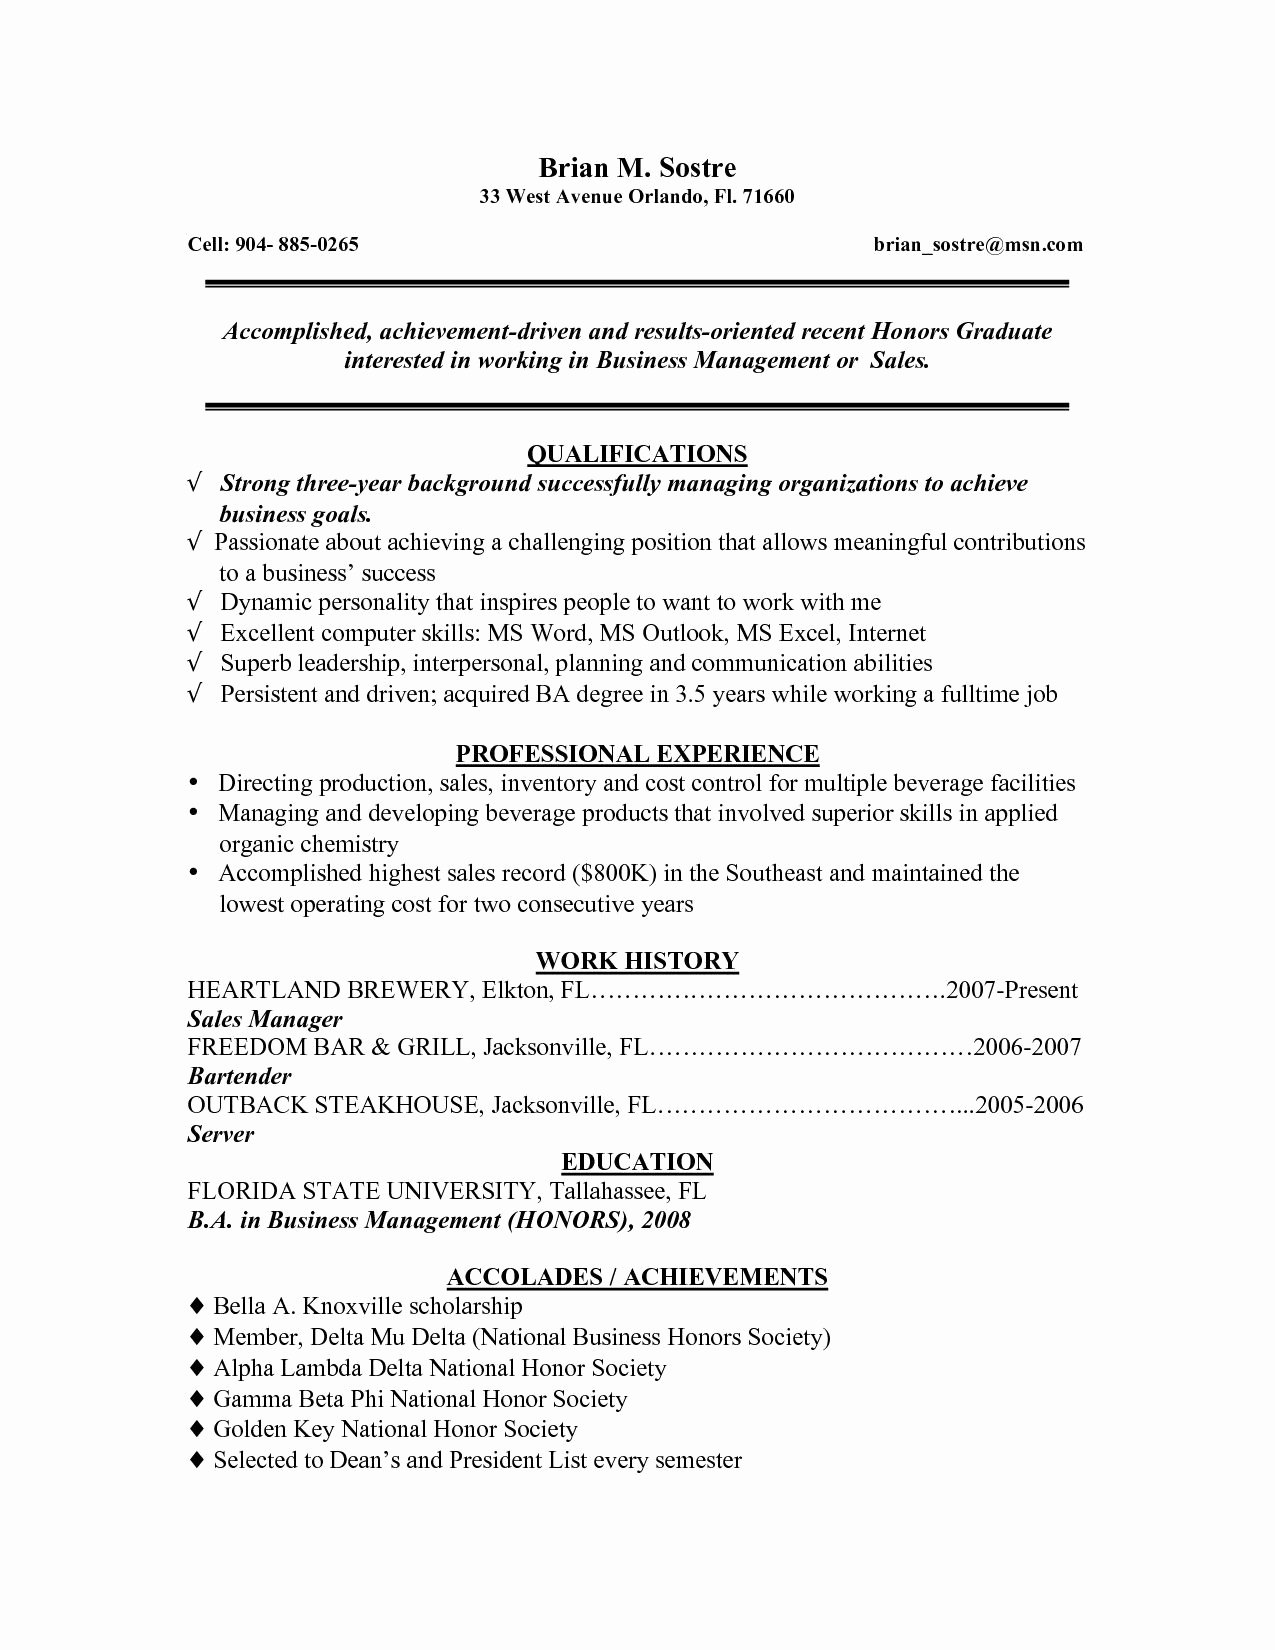 College Graduate Resume Template Awesome Resume Examples College Graduate College Examples